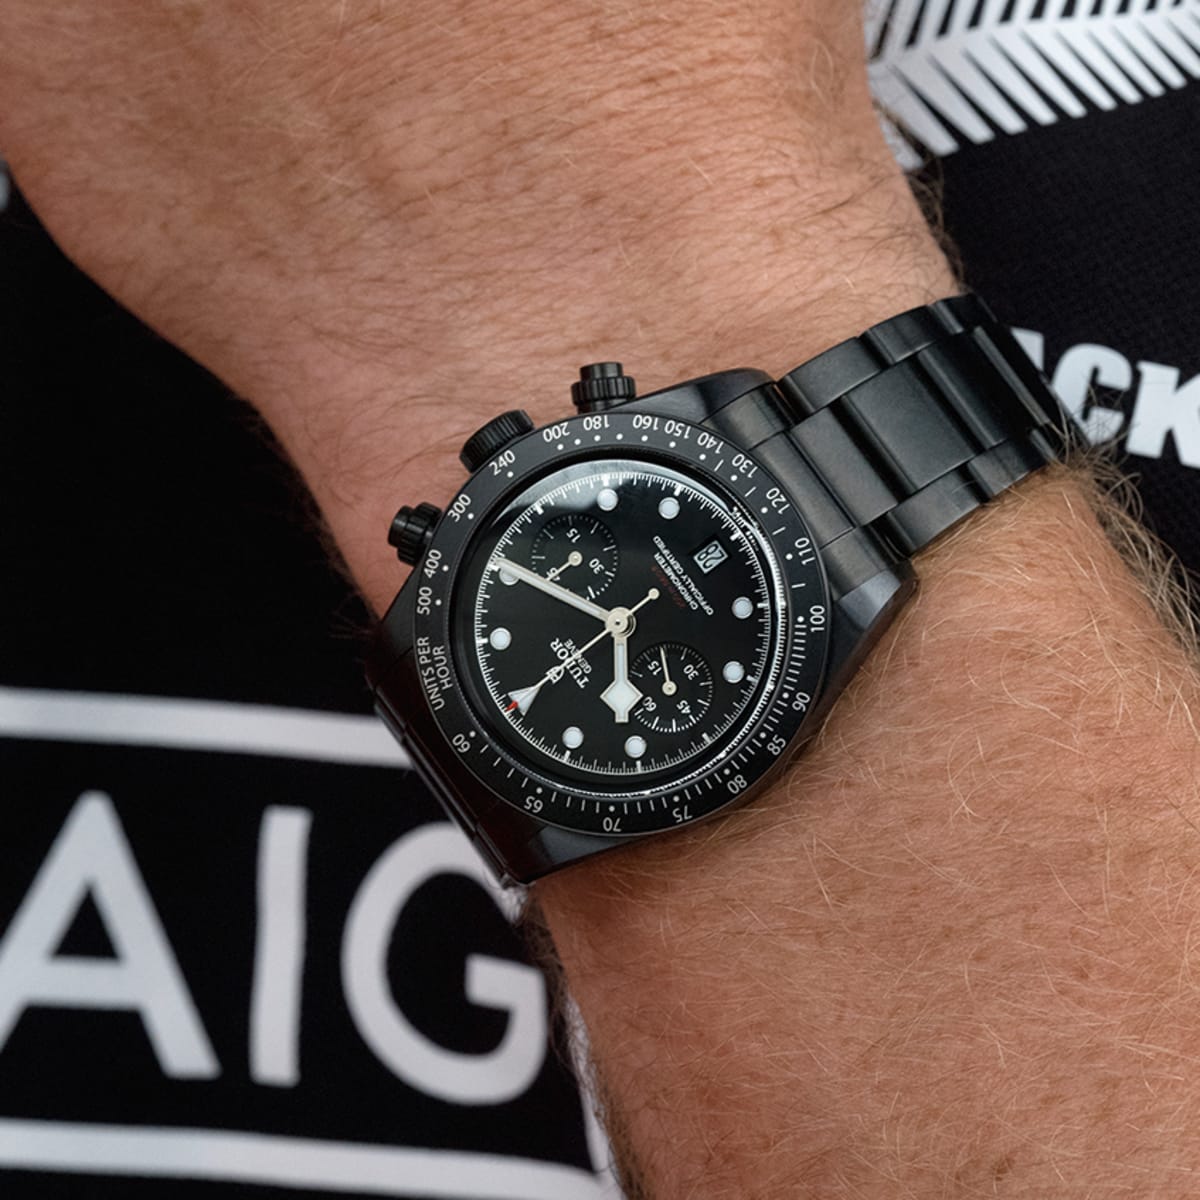 This Tudor Watch Is Inspired by New Zealands All Blacks Rugby Team